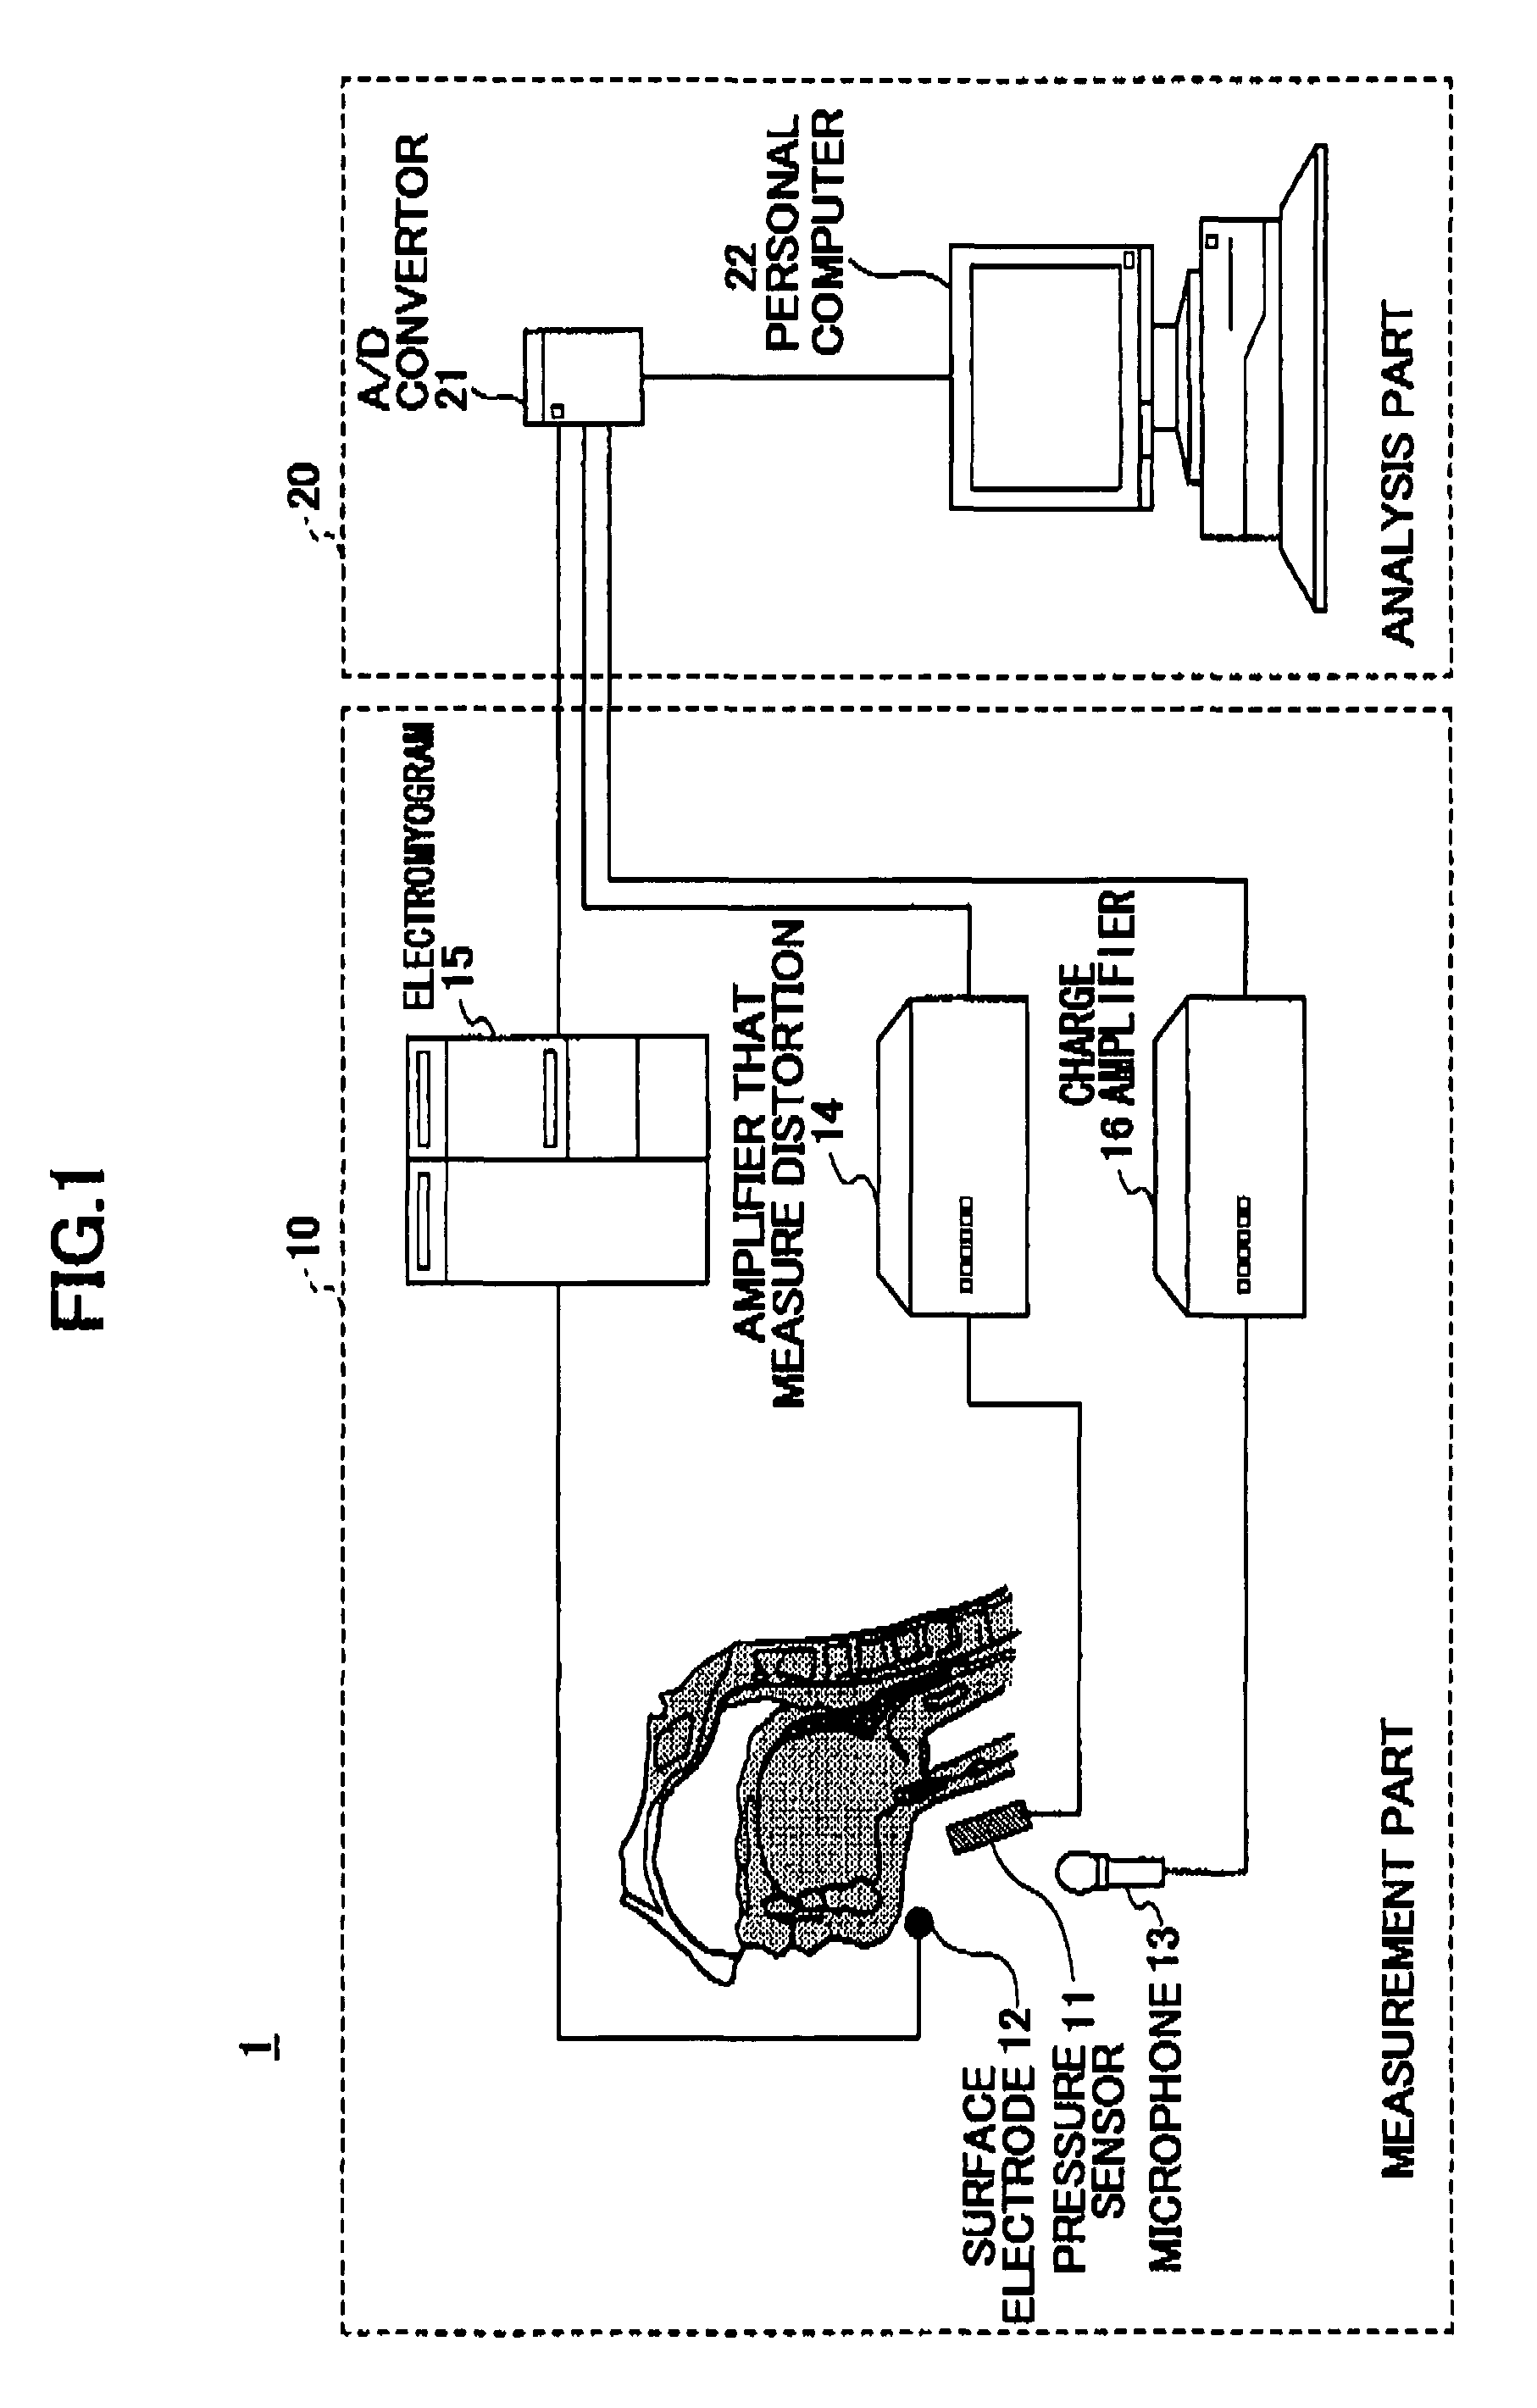 Continuous swallowing movement measuring device and method for measuring a continuous swallowing movement